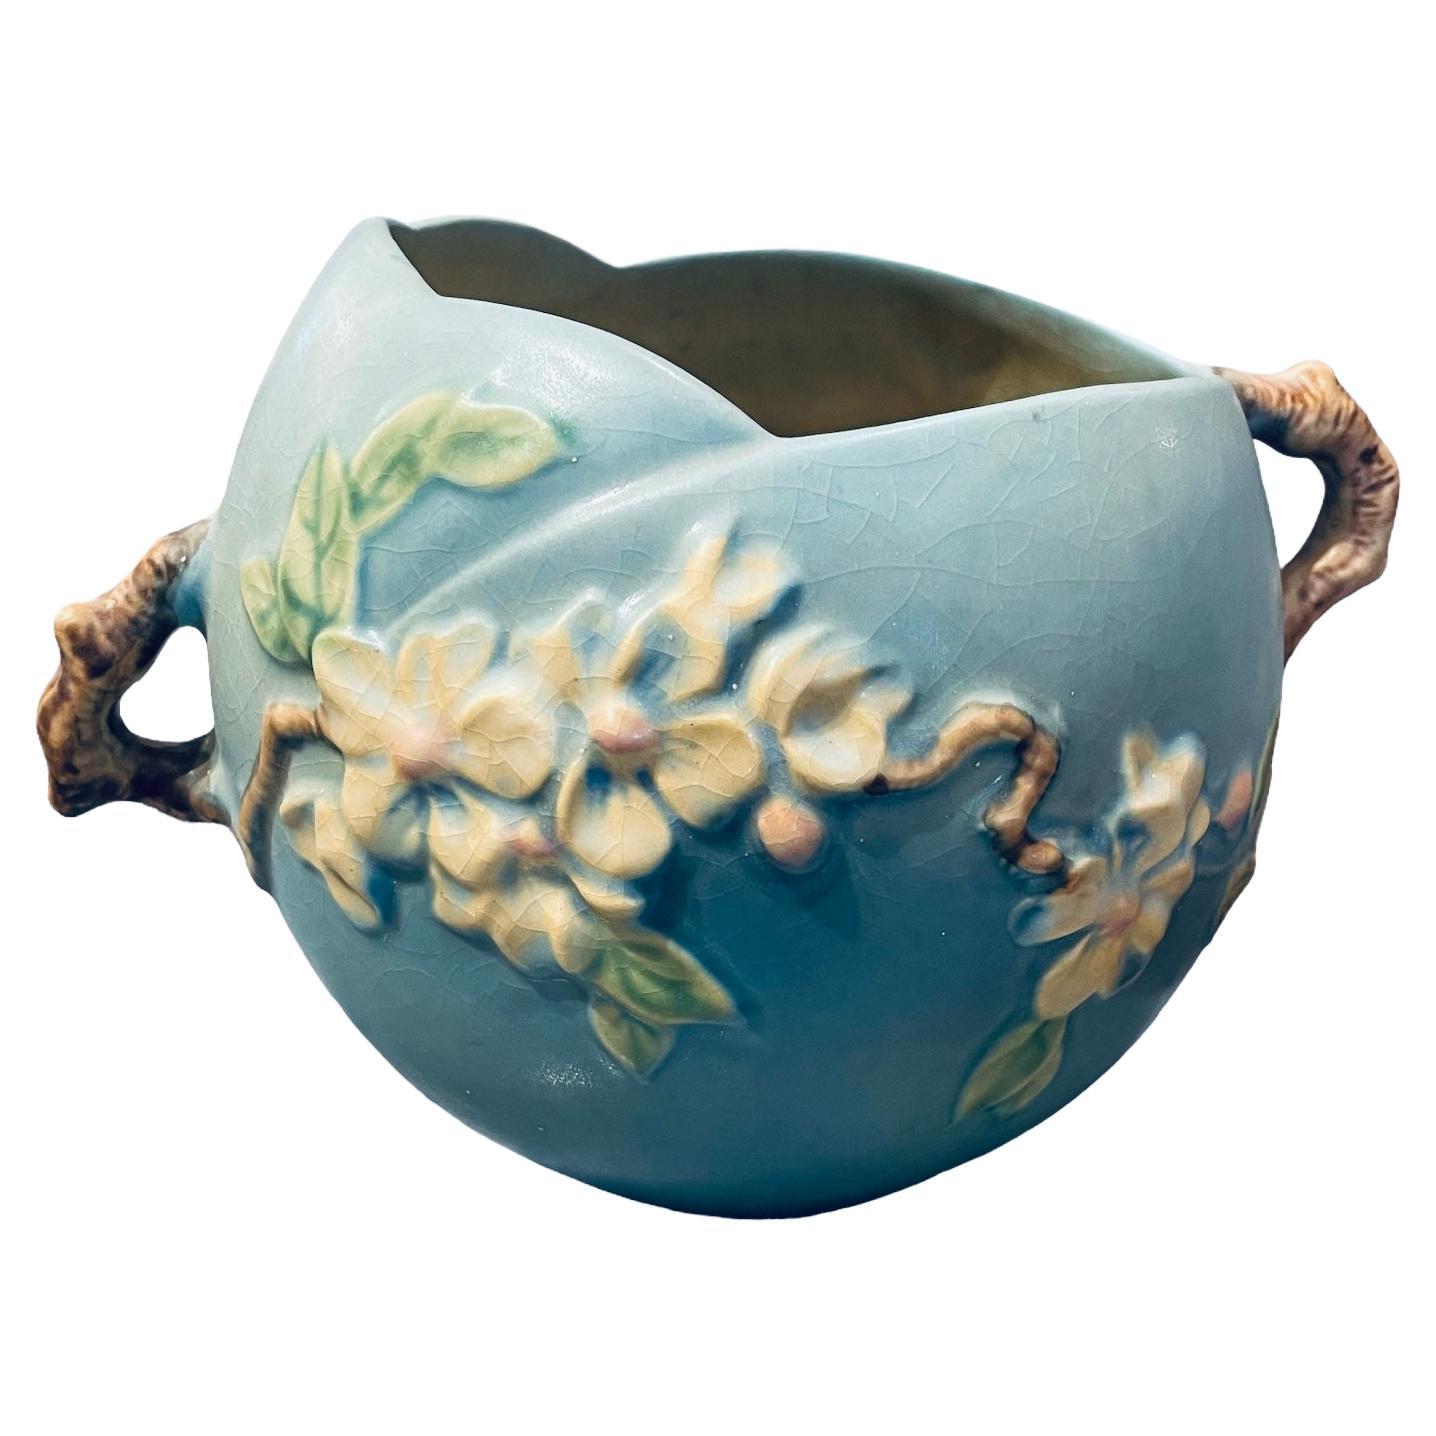 This is a Roseville Art Pottery Apple Blossom flowers pattern bowl. The bowl is blue and adorned with branches of white Apple Blossom flowers and green leaves in the front. Part of the branch made the handles at each side. Also, the upper border of